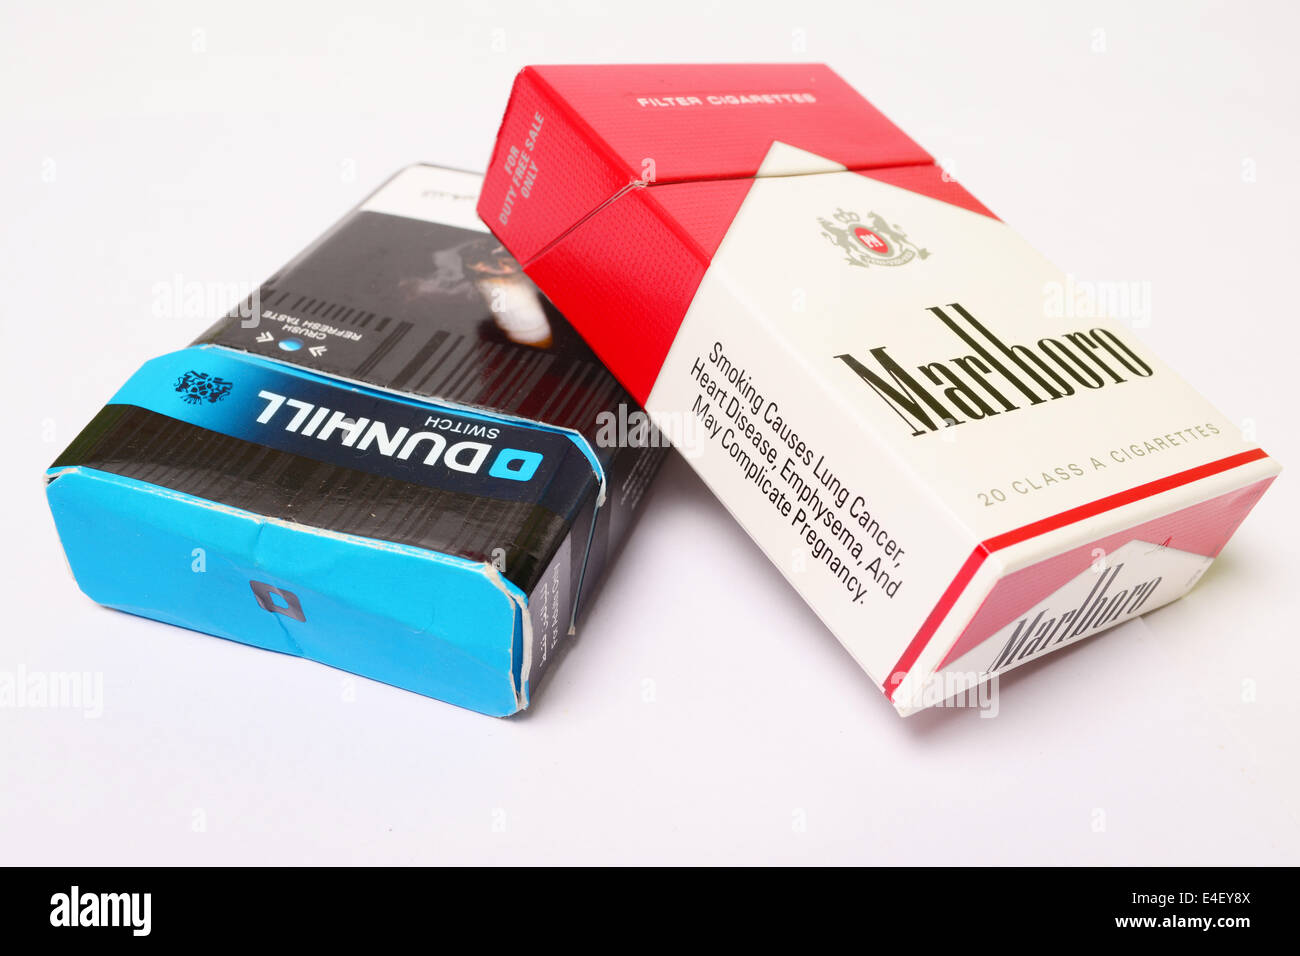 Packets of Marlboro and Dunhill Cigarettes Stock Photo - Alamy